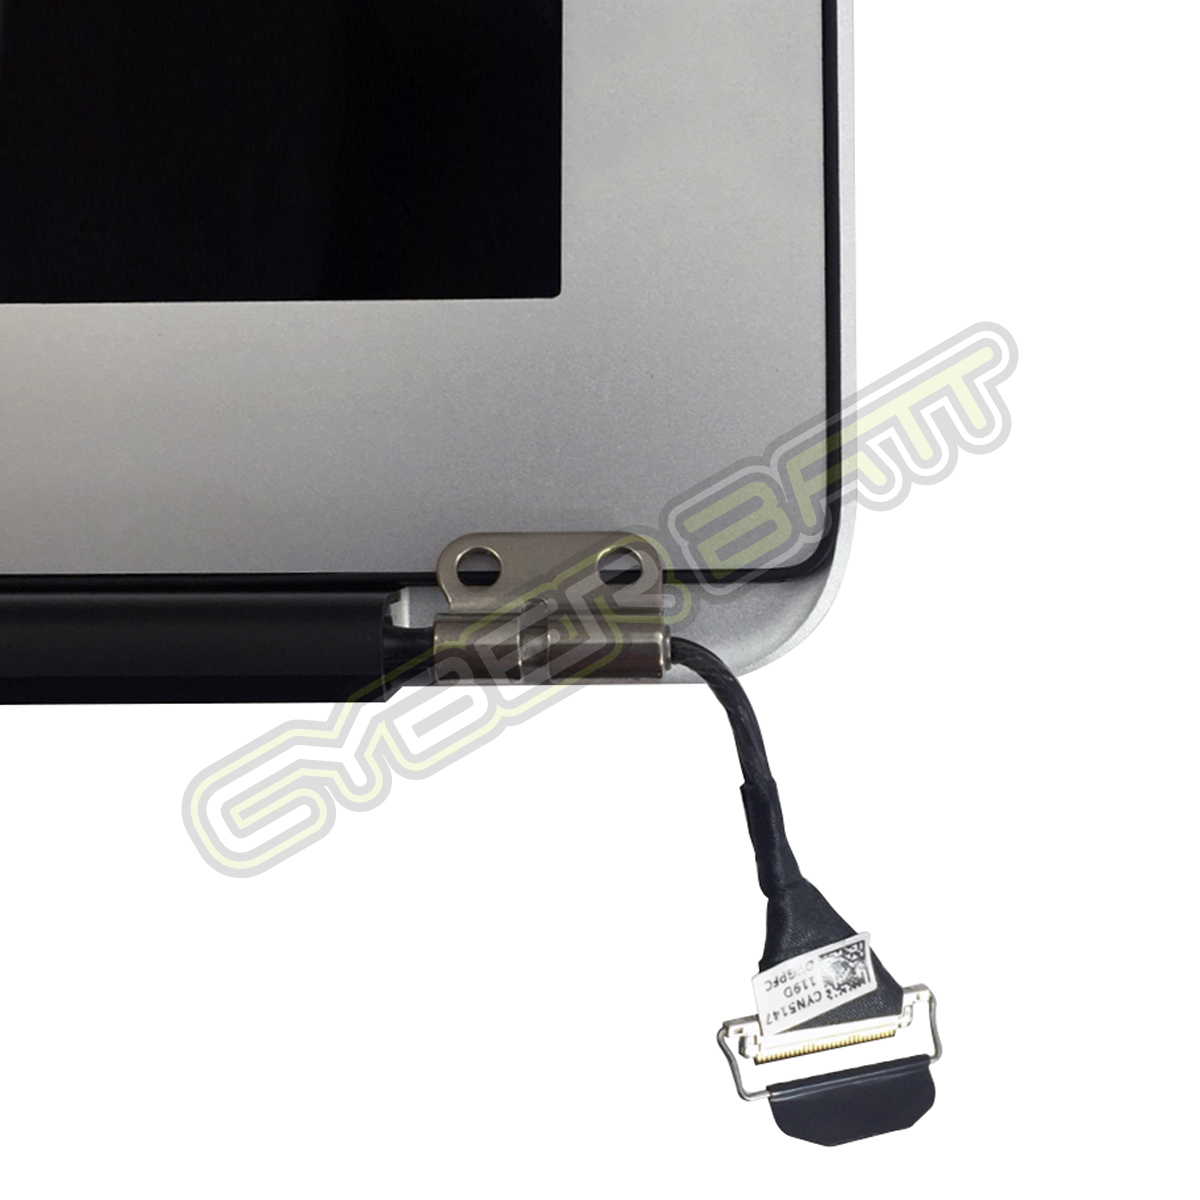 LCD Assembly MacBook Air 11 A1465 Mid 2012